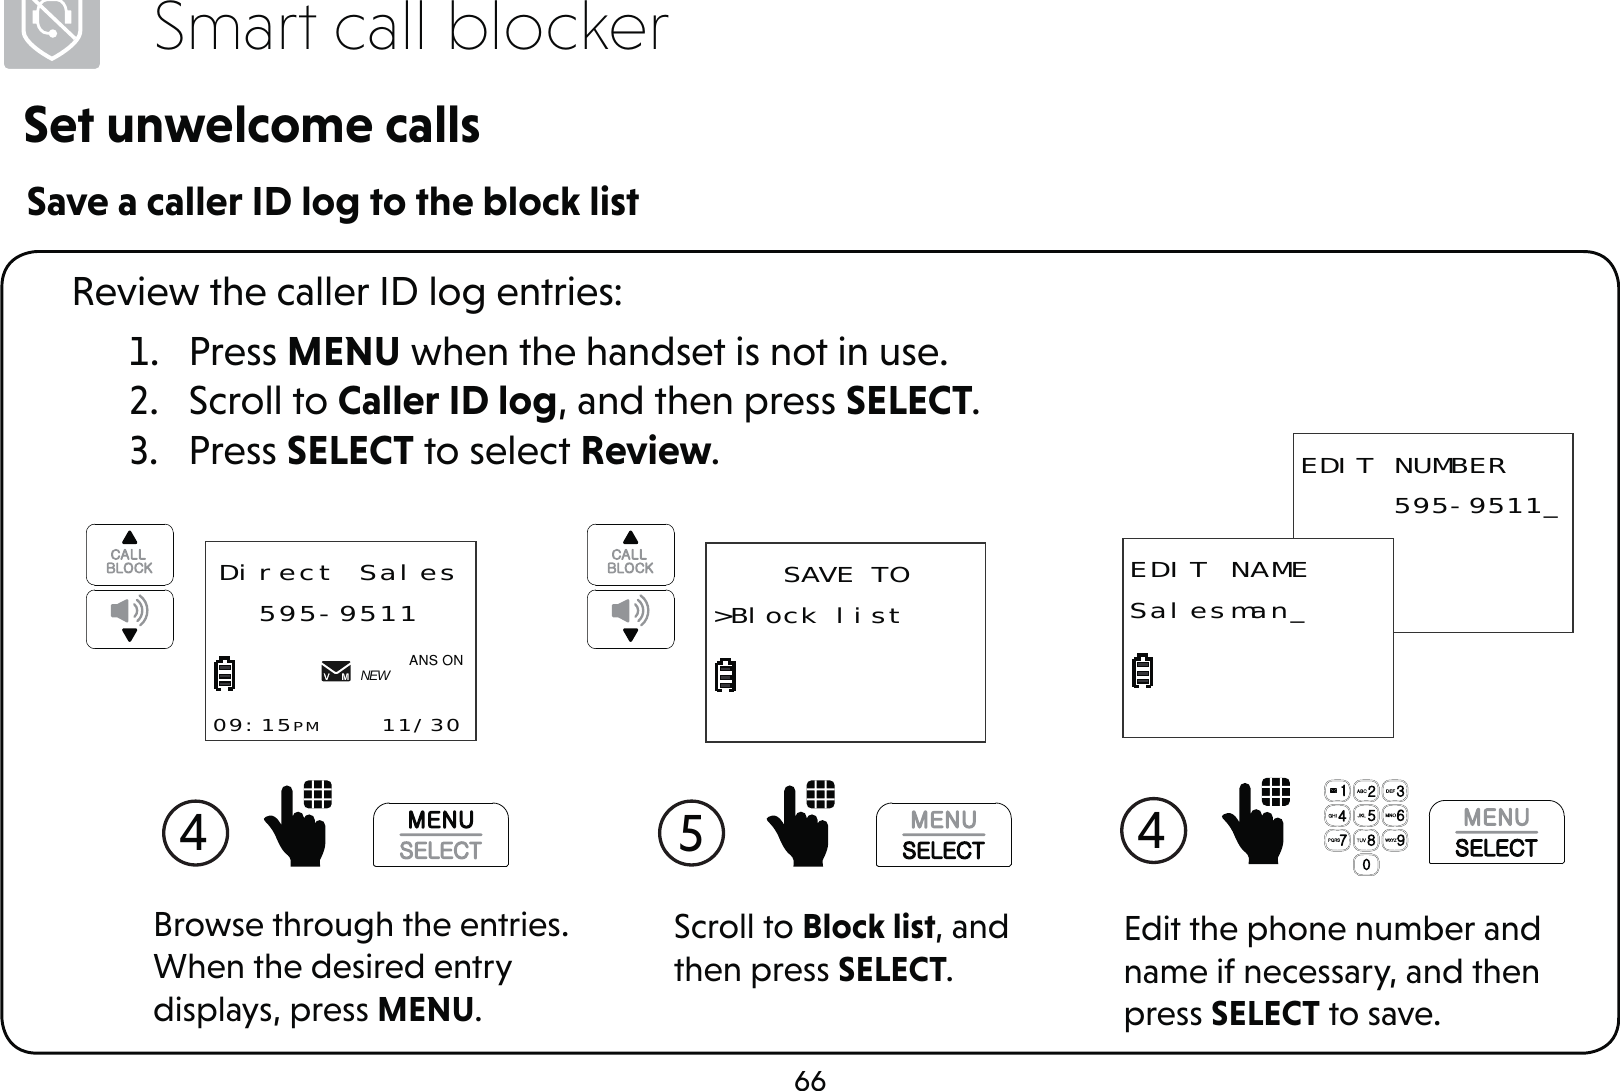 66Smart call blockerSet unwelcome callsSave a caller ID log to the block list1. Press MENU when the handset is not in use.2. Scroll to Caller ID log, and then press SELECT.3. Press SELECT to select Review.Review the caller ID log entries:Scroll to Block list, and then press SELECT.5 SAVE TO&gt;Block list4 Direct Sales595-951109:15PM    11/30NEW$1621Browse through the entries. When the desired entry displays, press MENU.Edit the phone number and name if necessary, and then press SELECT to save.4  EDIT NUMBER     595-9511_EDIT NAMESalesman_